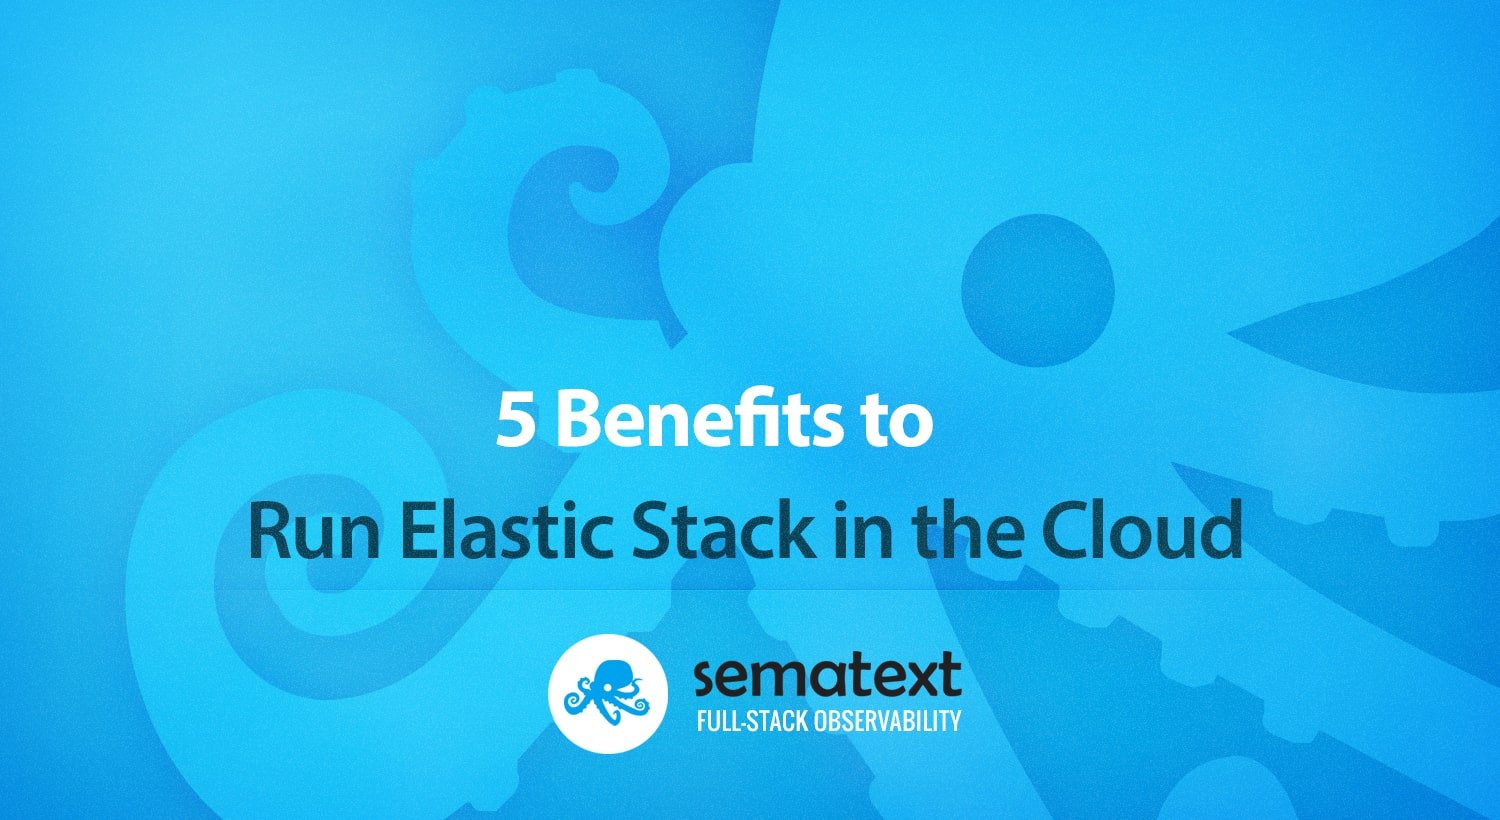 5 Benefits to Run Elastic Stack in the Cloud